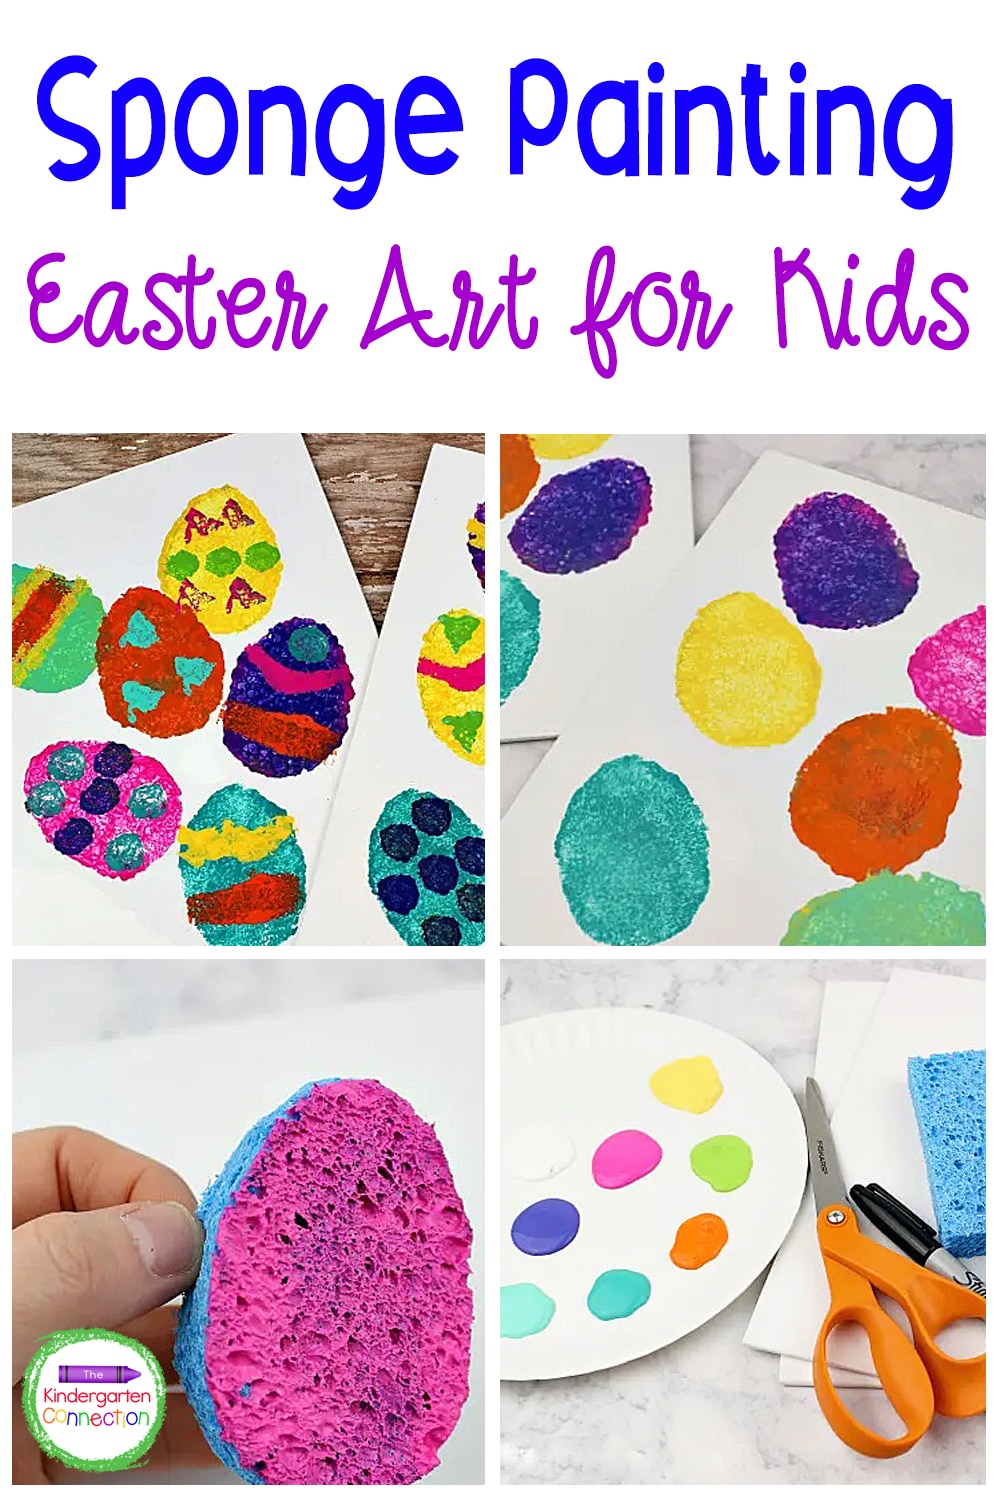 This Sponge Painting Easter Art Activity is an easy and creative way to bring some Easter egg fun into your classroom this spring!